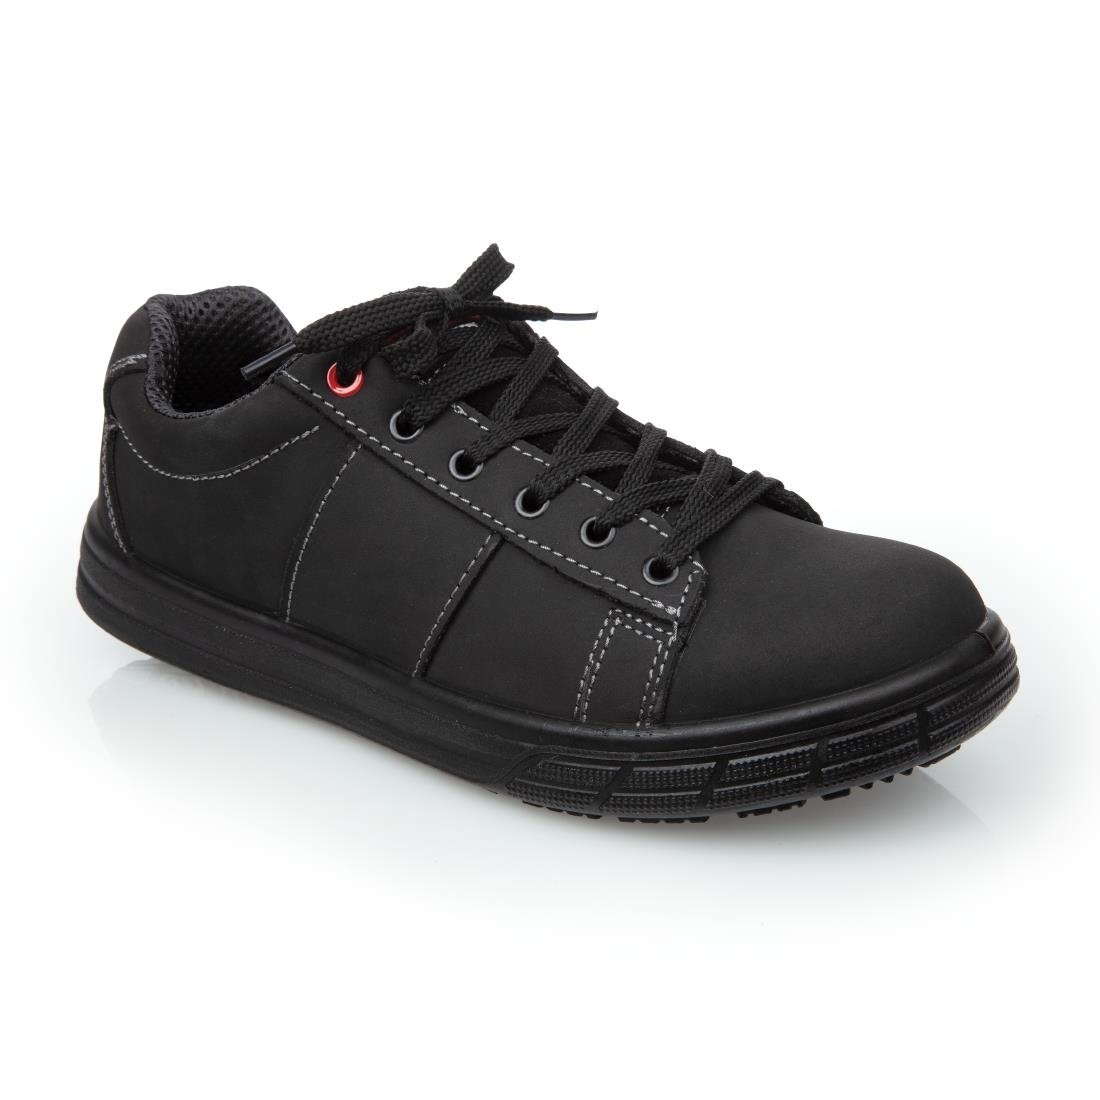 BB420-42 Slipbuster Safety Trainers Black 42